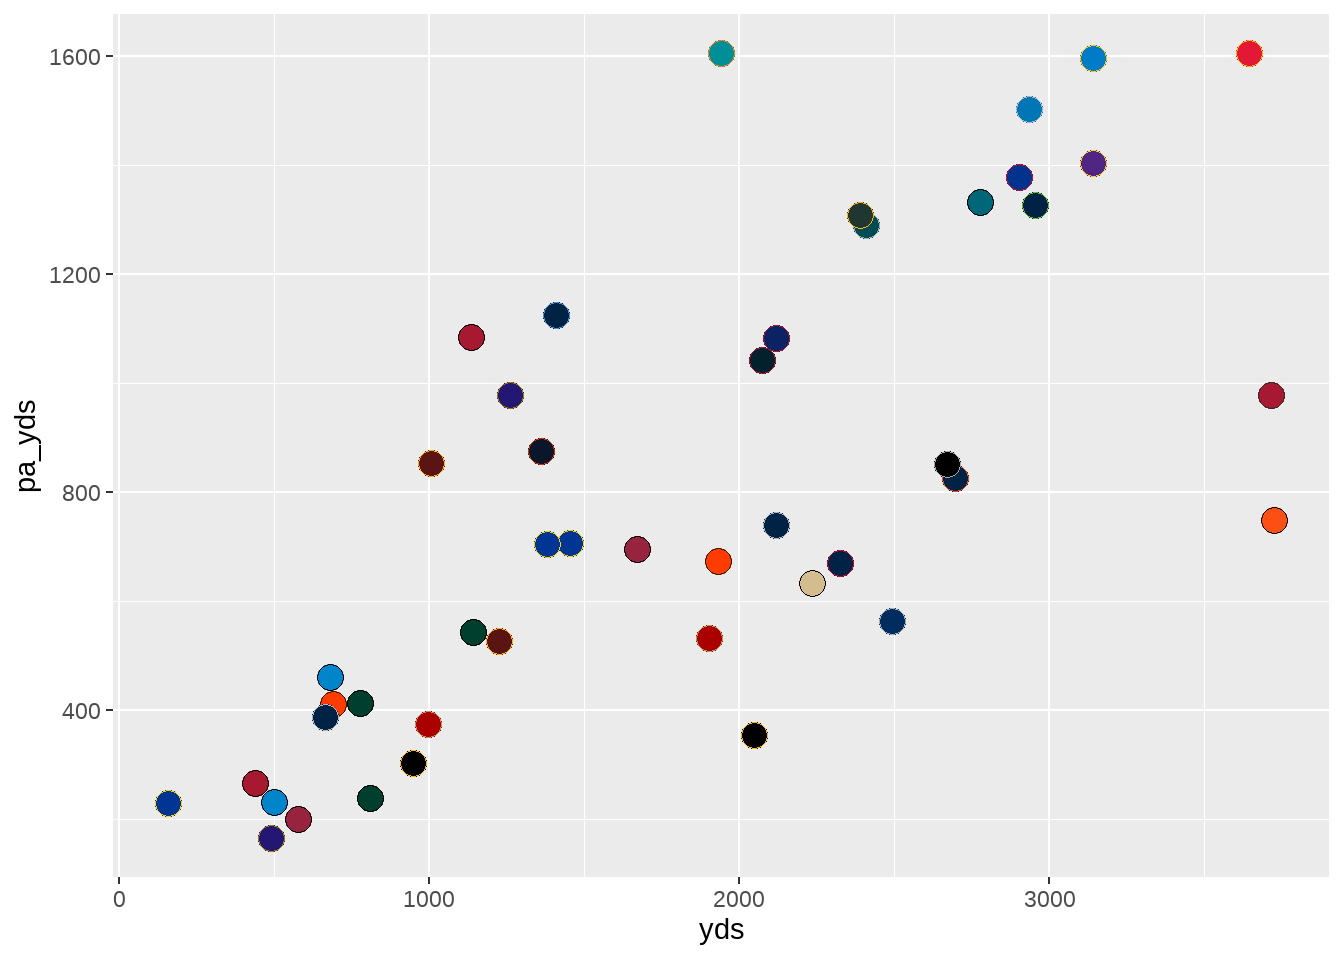 Introduction to NFL Analytics with R - 4 Data Visualization with NFL Data